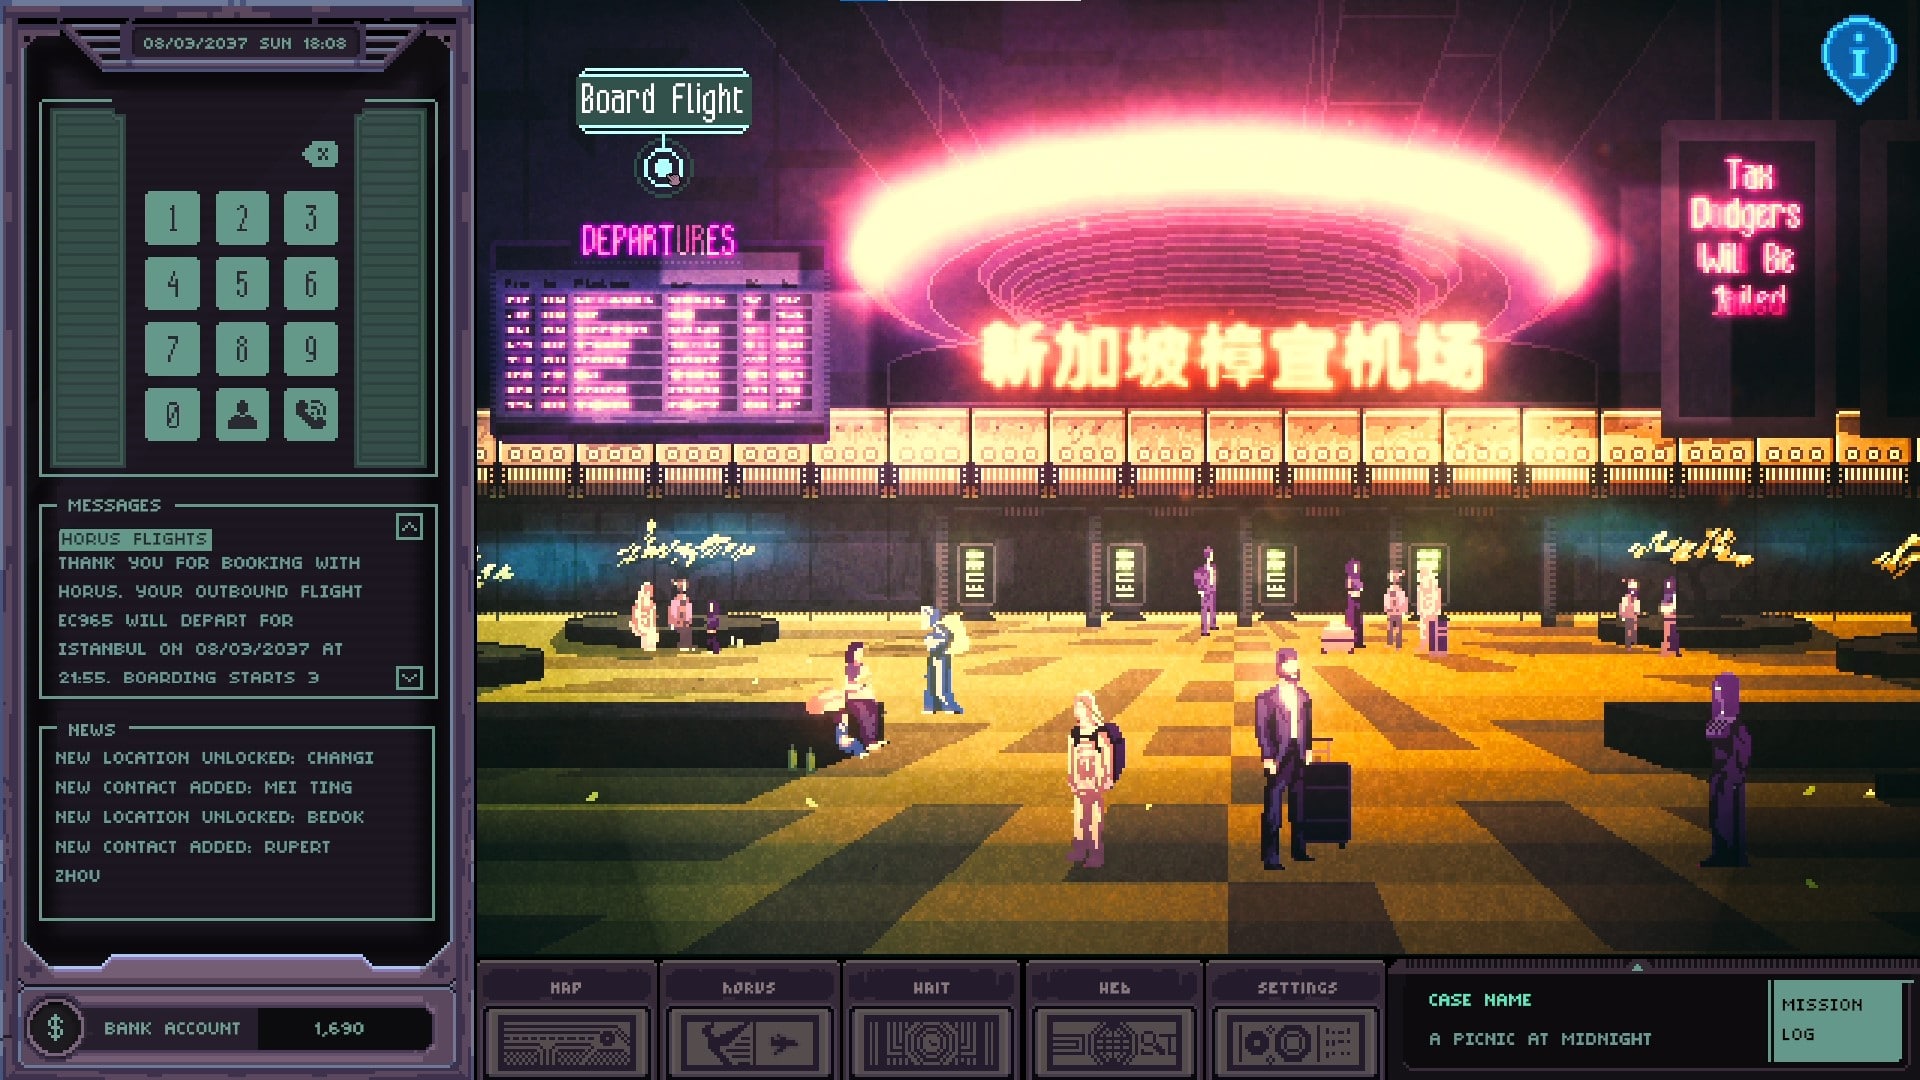 A typical navigation screen in Chinatown Detective Agency.